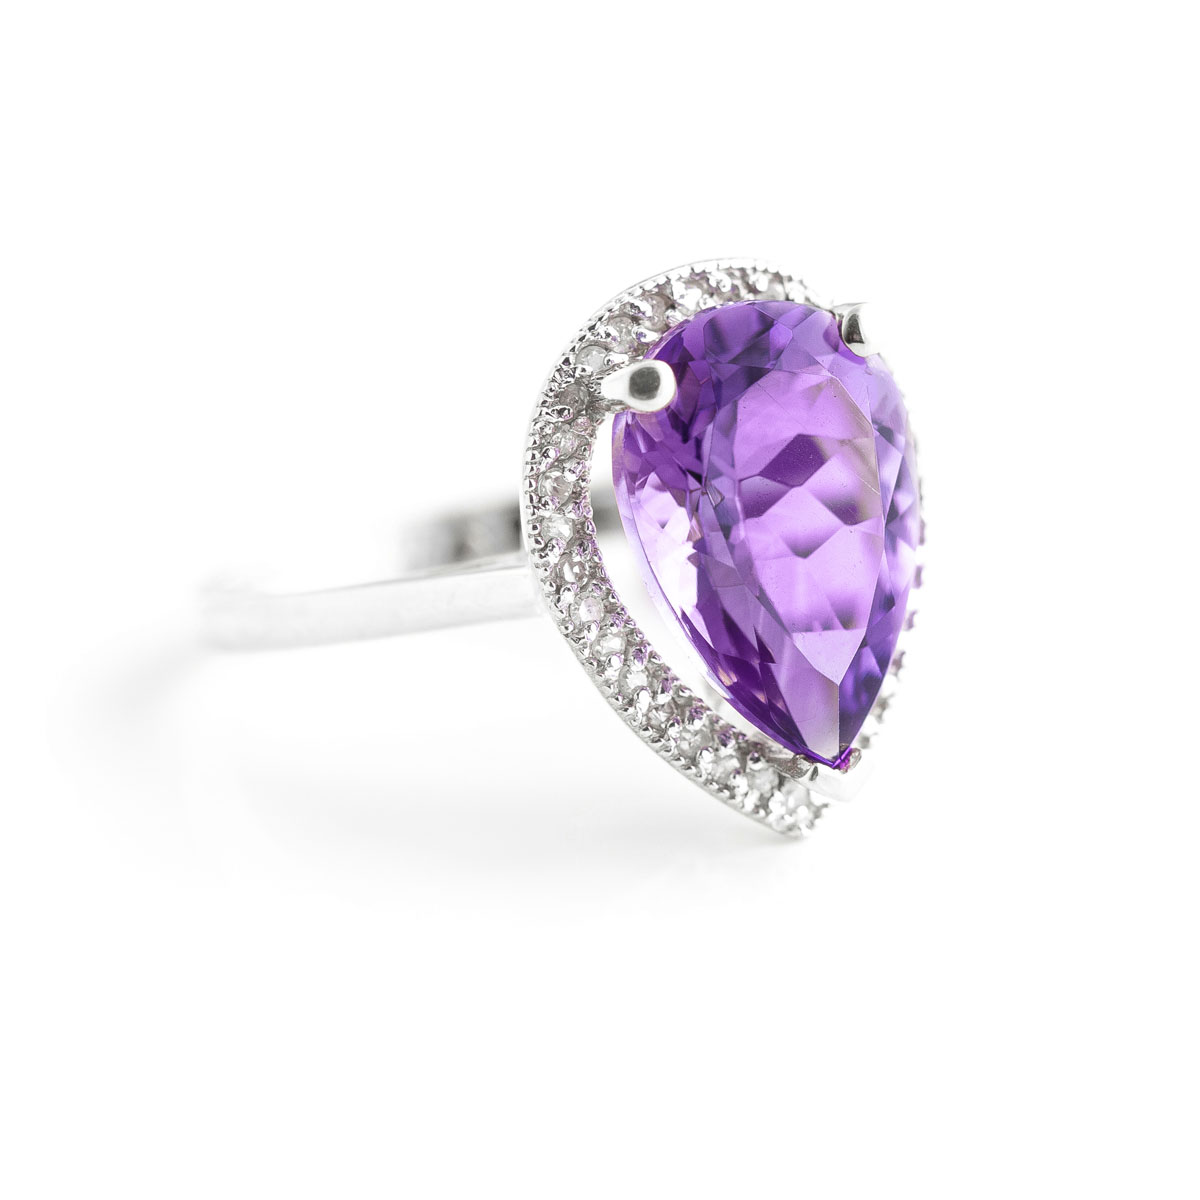 Amethyst Halo Ring 3.41 ctw in 9ct White Gold